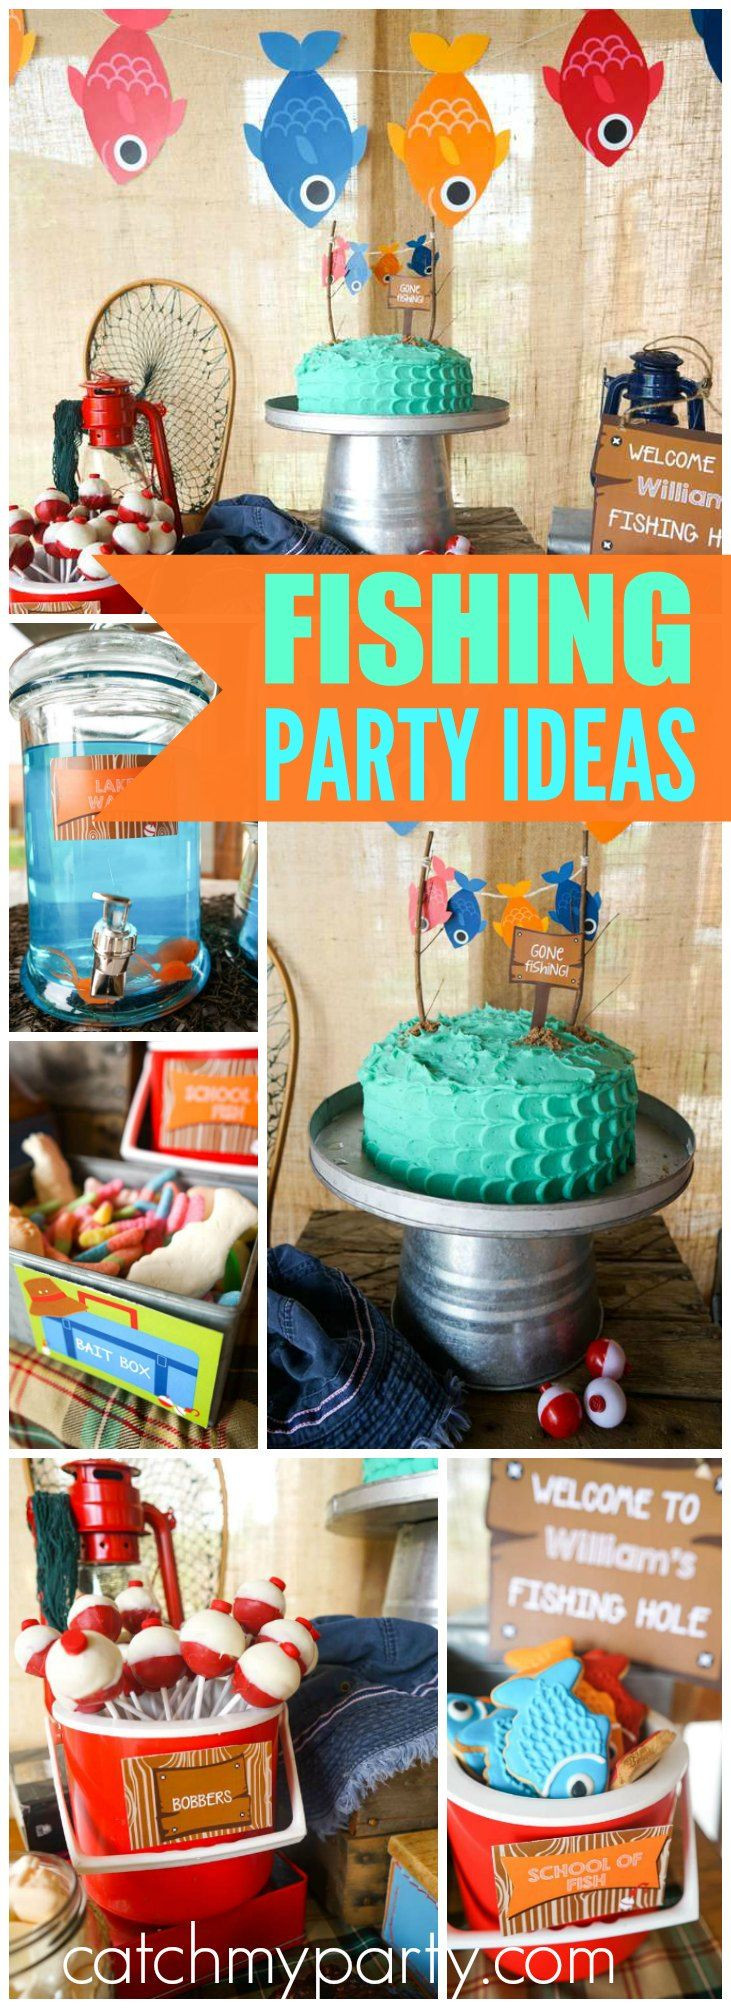 Fishing Birthday Party Ideas
 Fishing Party Birthday "William s Gone Fishing Party